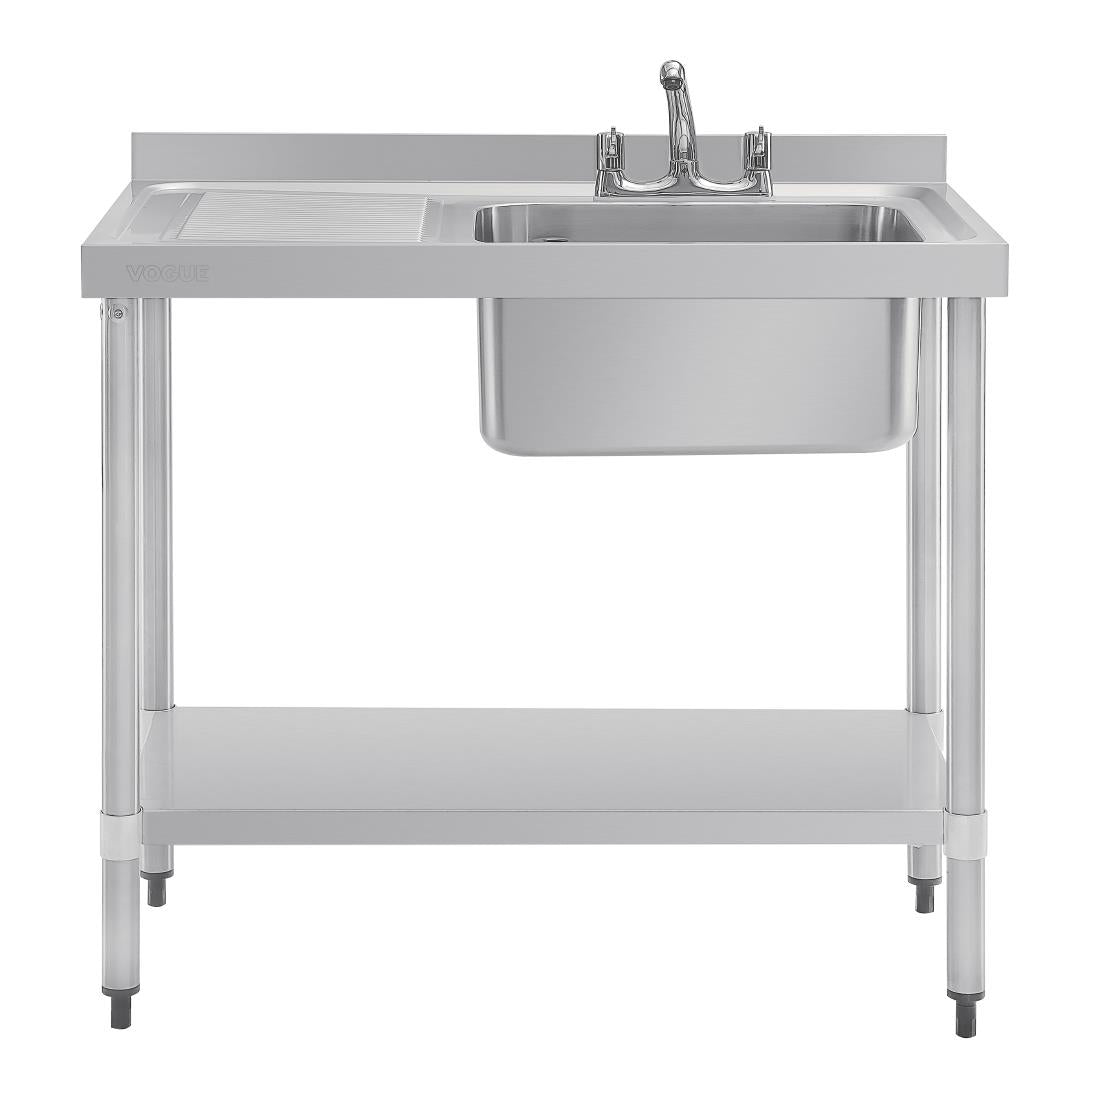 DY821 Vogue Single Sink Left Hand Drainer 1000mm JD Catering Equipment Solutions Ltd